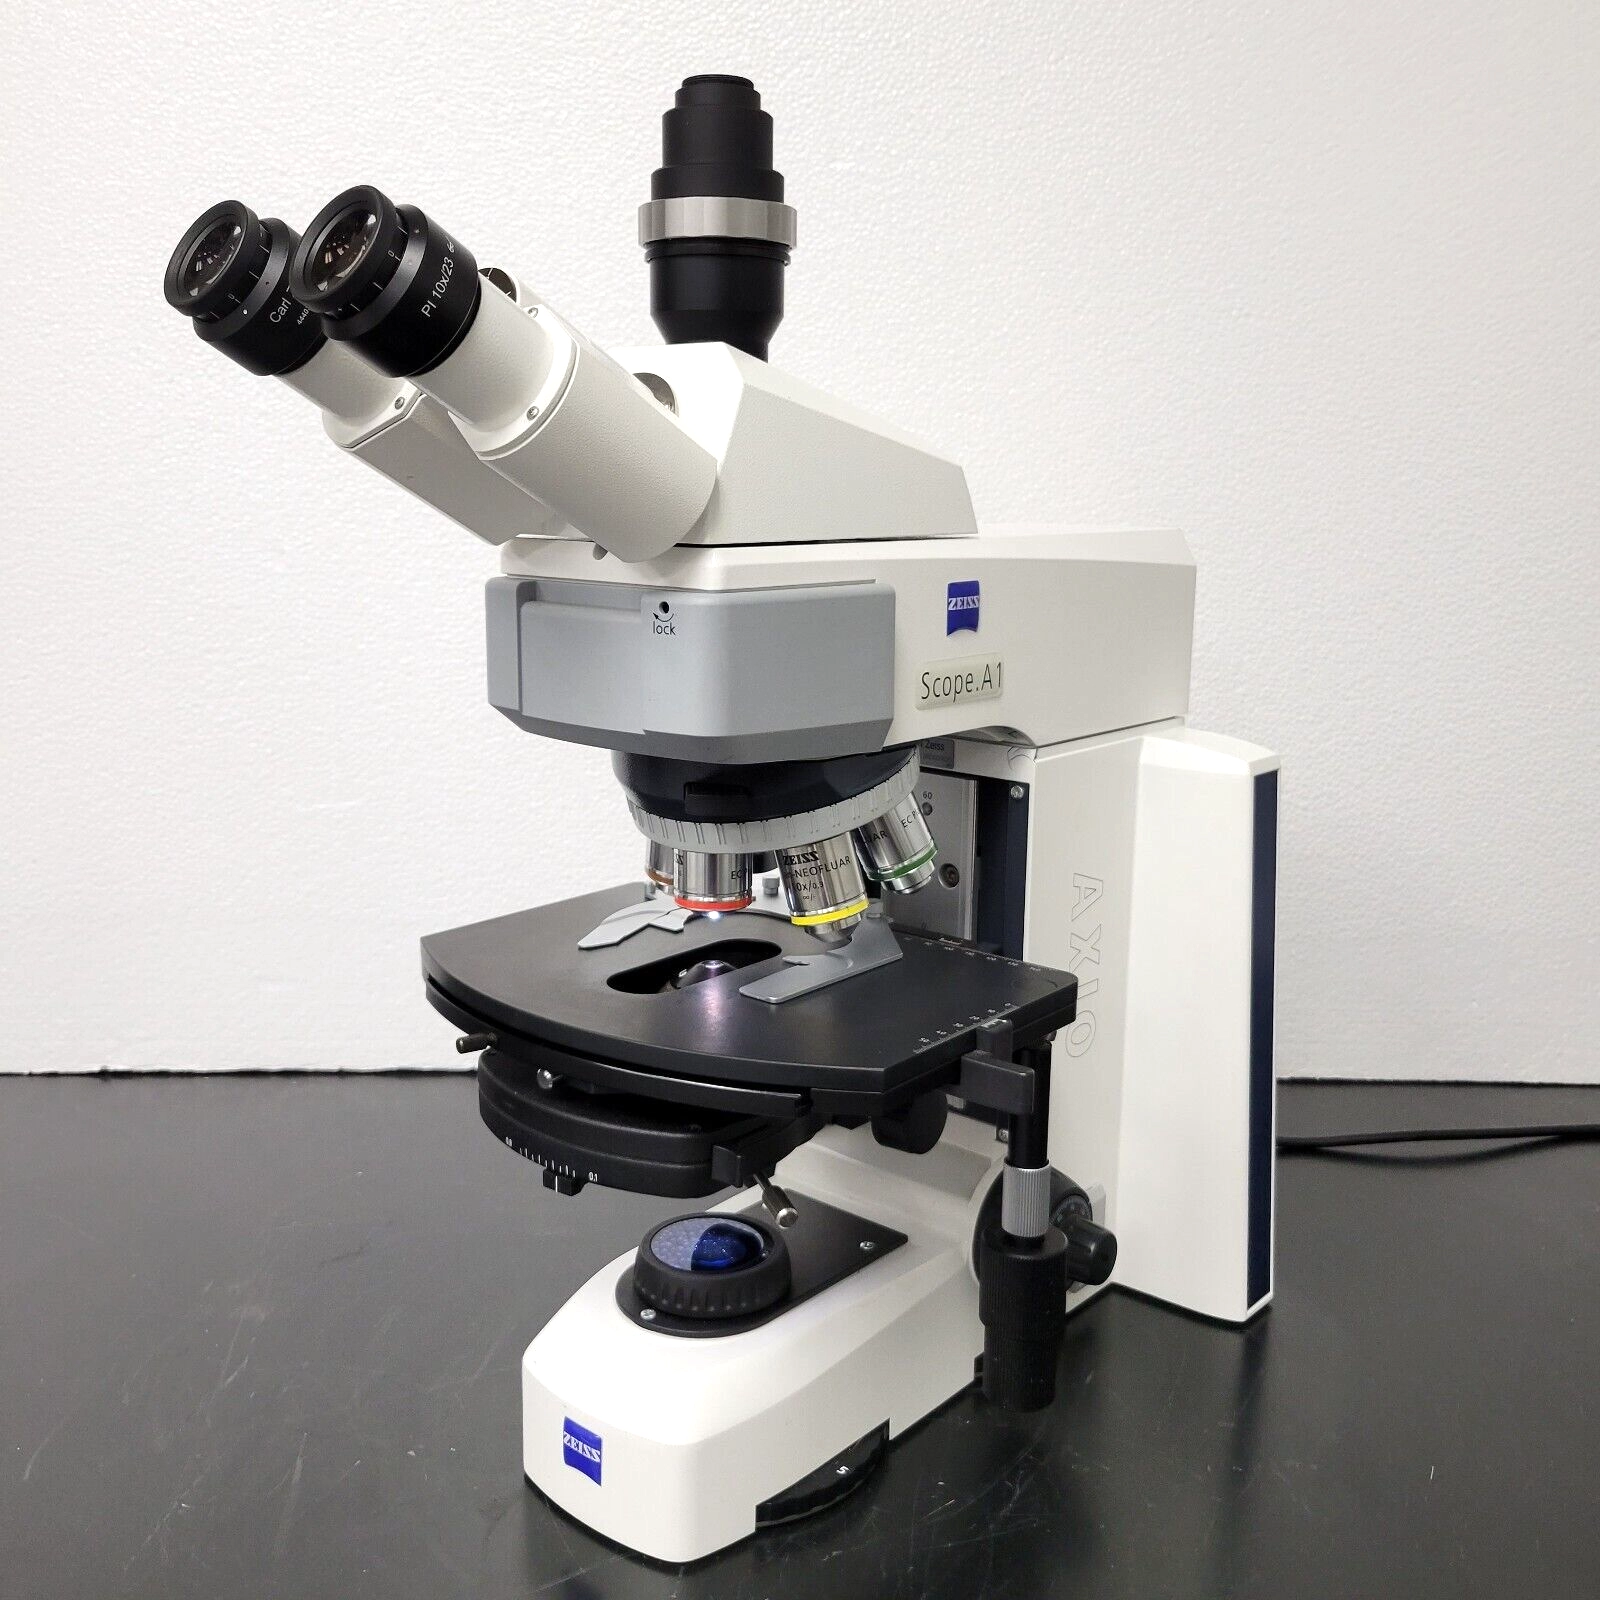 Zeiss Microscope Axio Scope.A1 with Trinocular Head, 1x and 2.5x Objectives